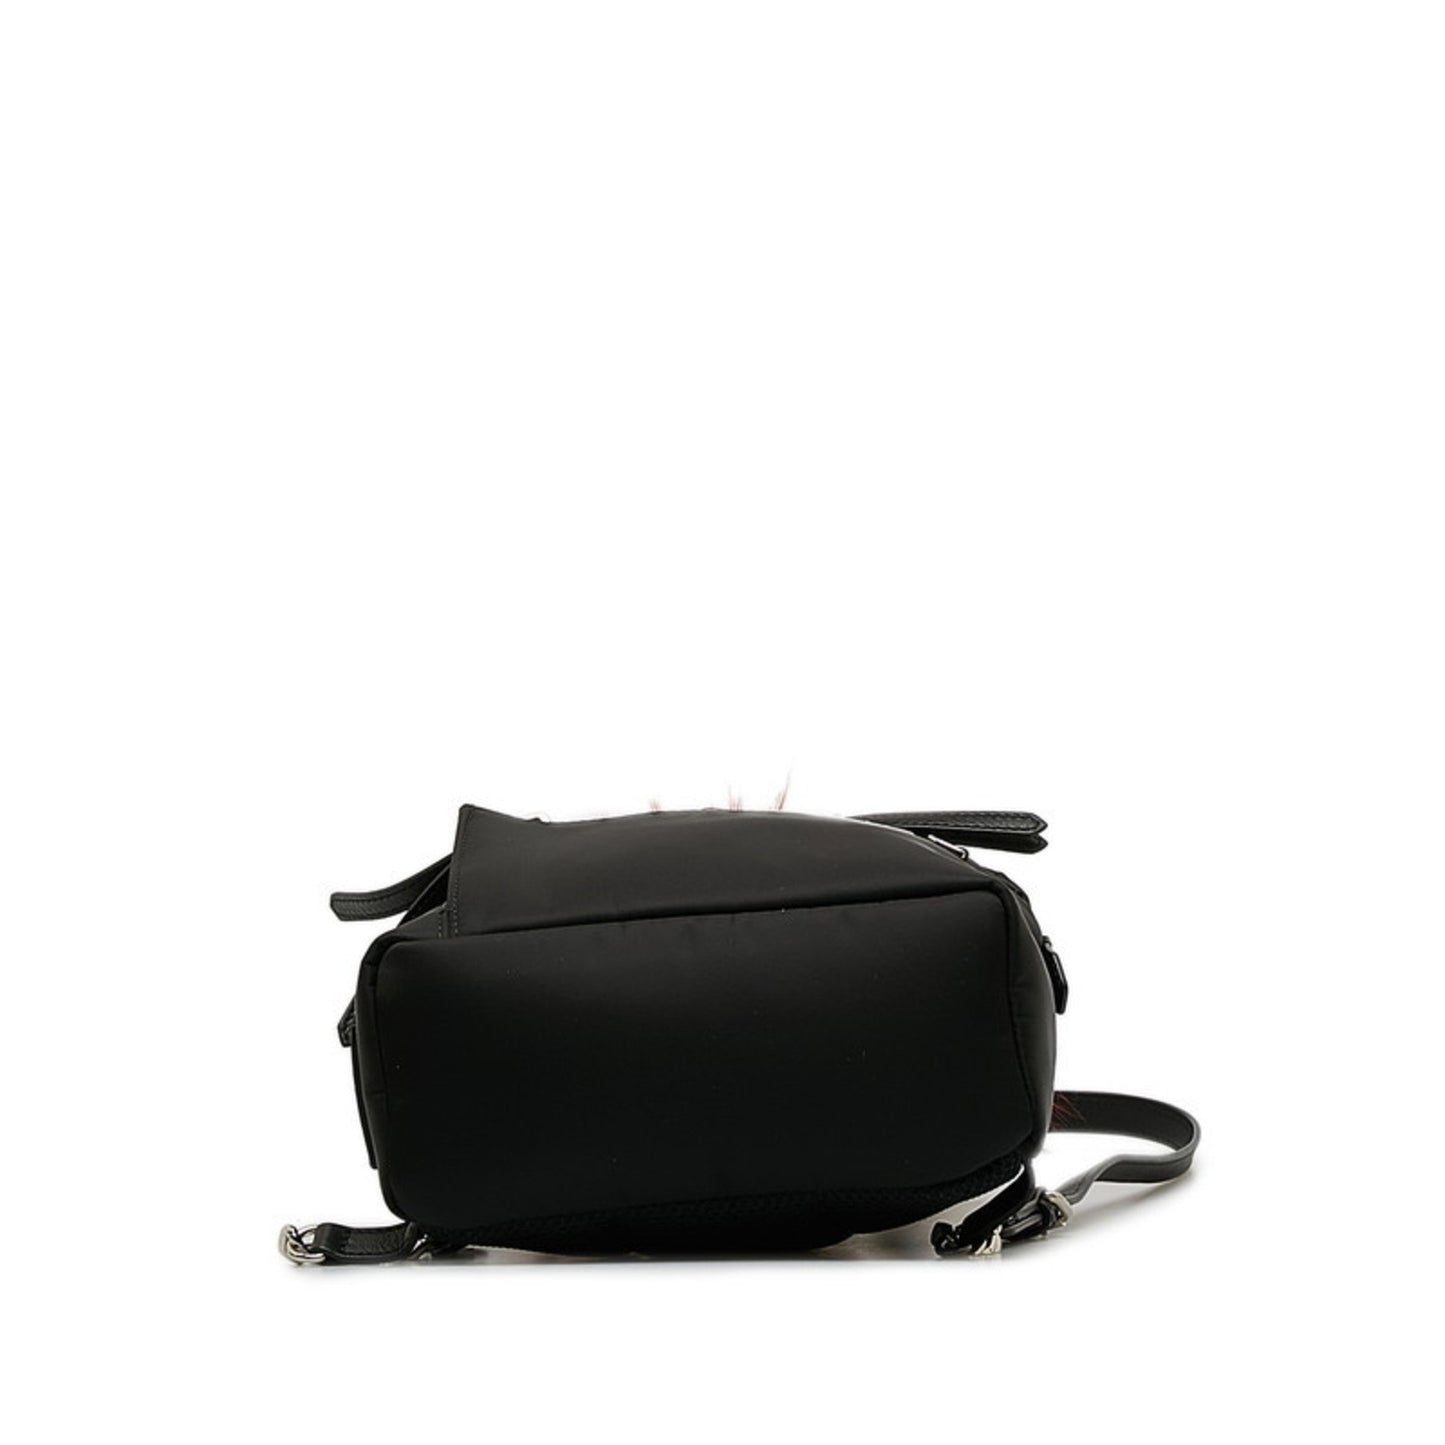 Fendi Women's Timeless Black Leather Backpack with Unique Design and Excellent Condition in Black